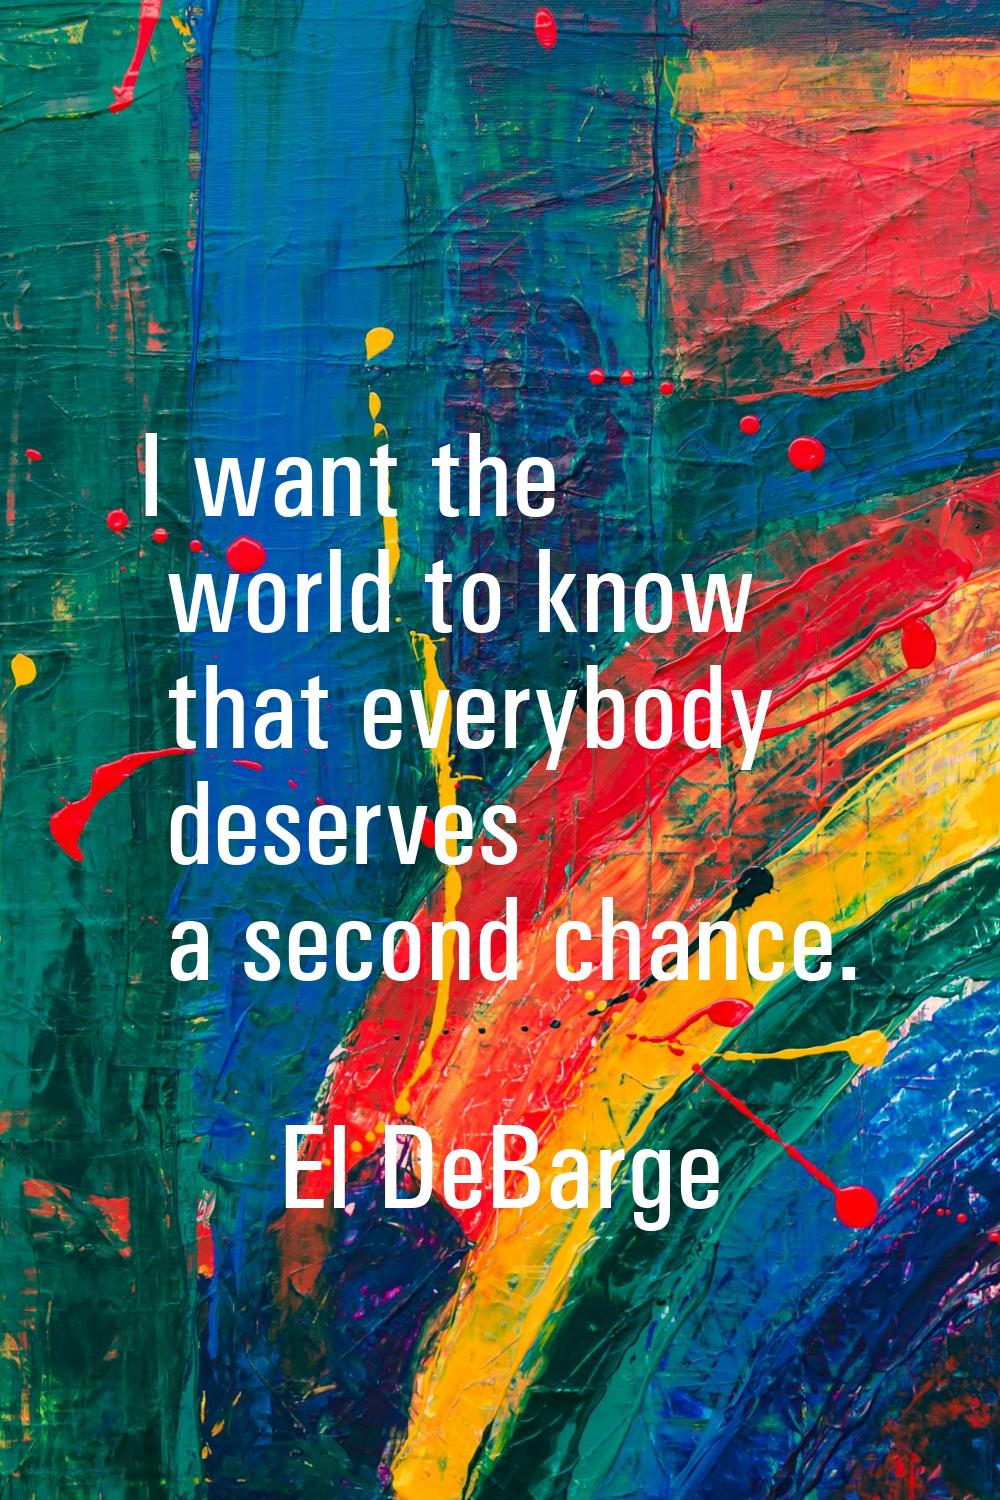 I want the world to know that everybody deserves a second chance.